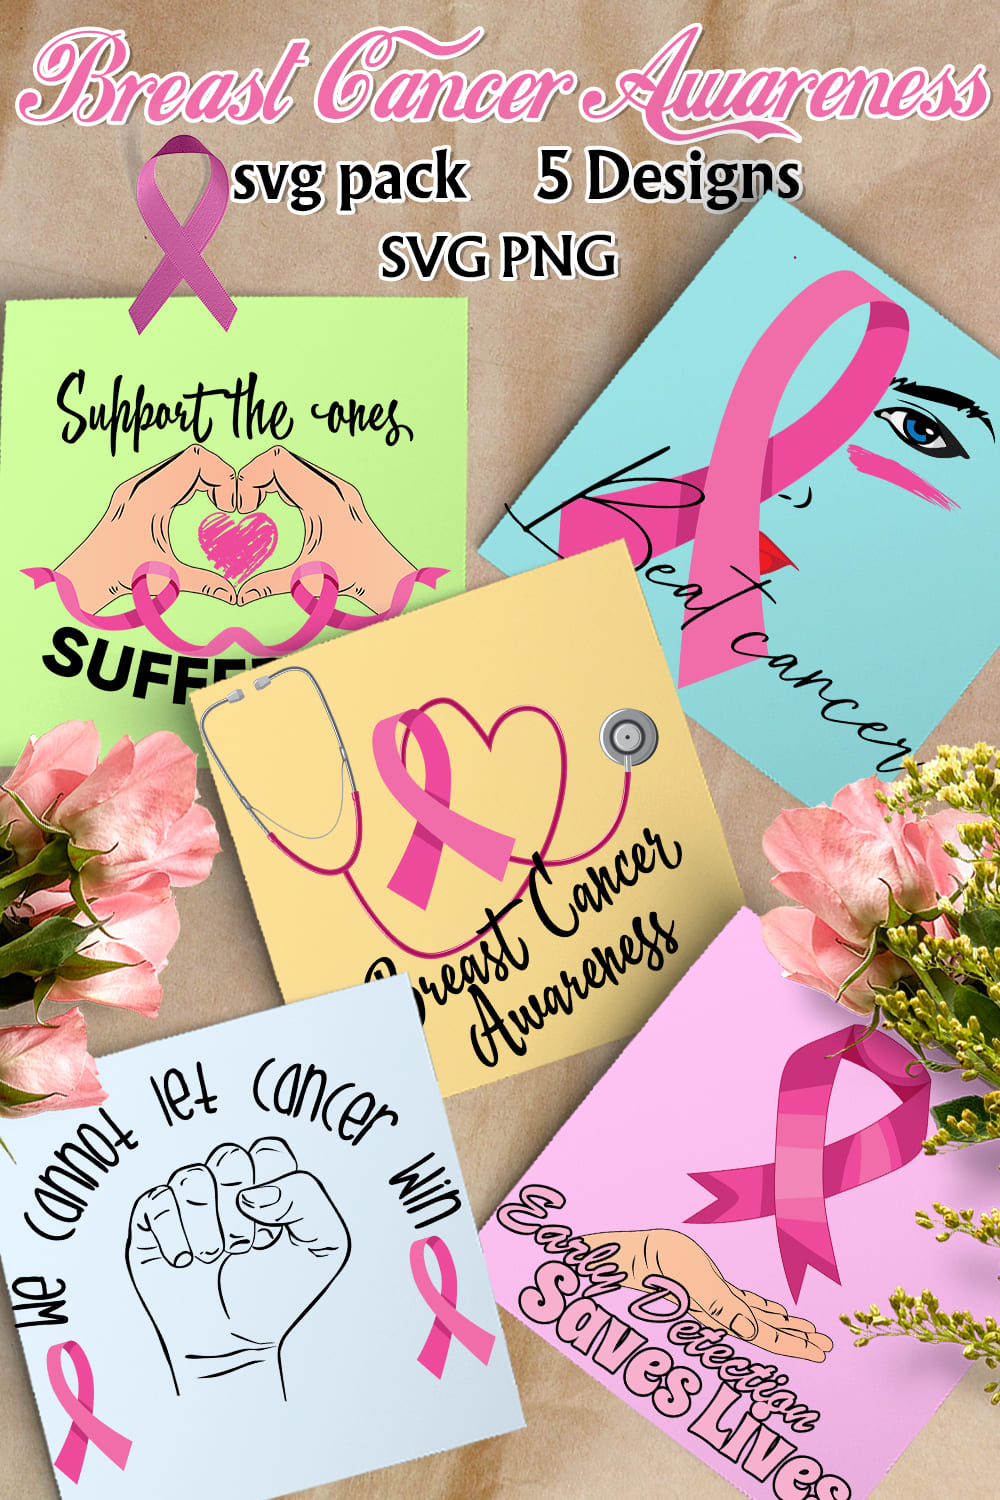 Colorful stickers with breast cancer illustrations.